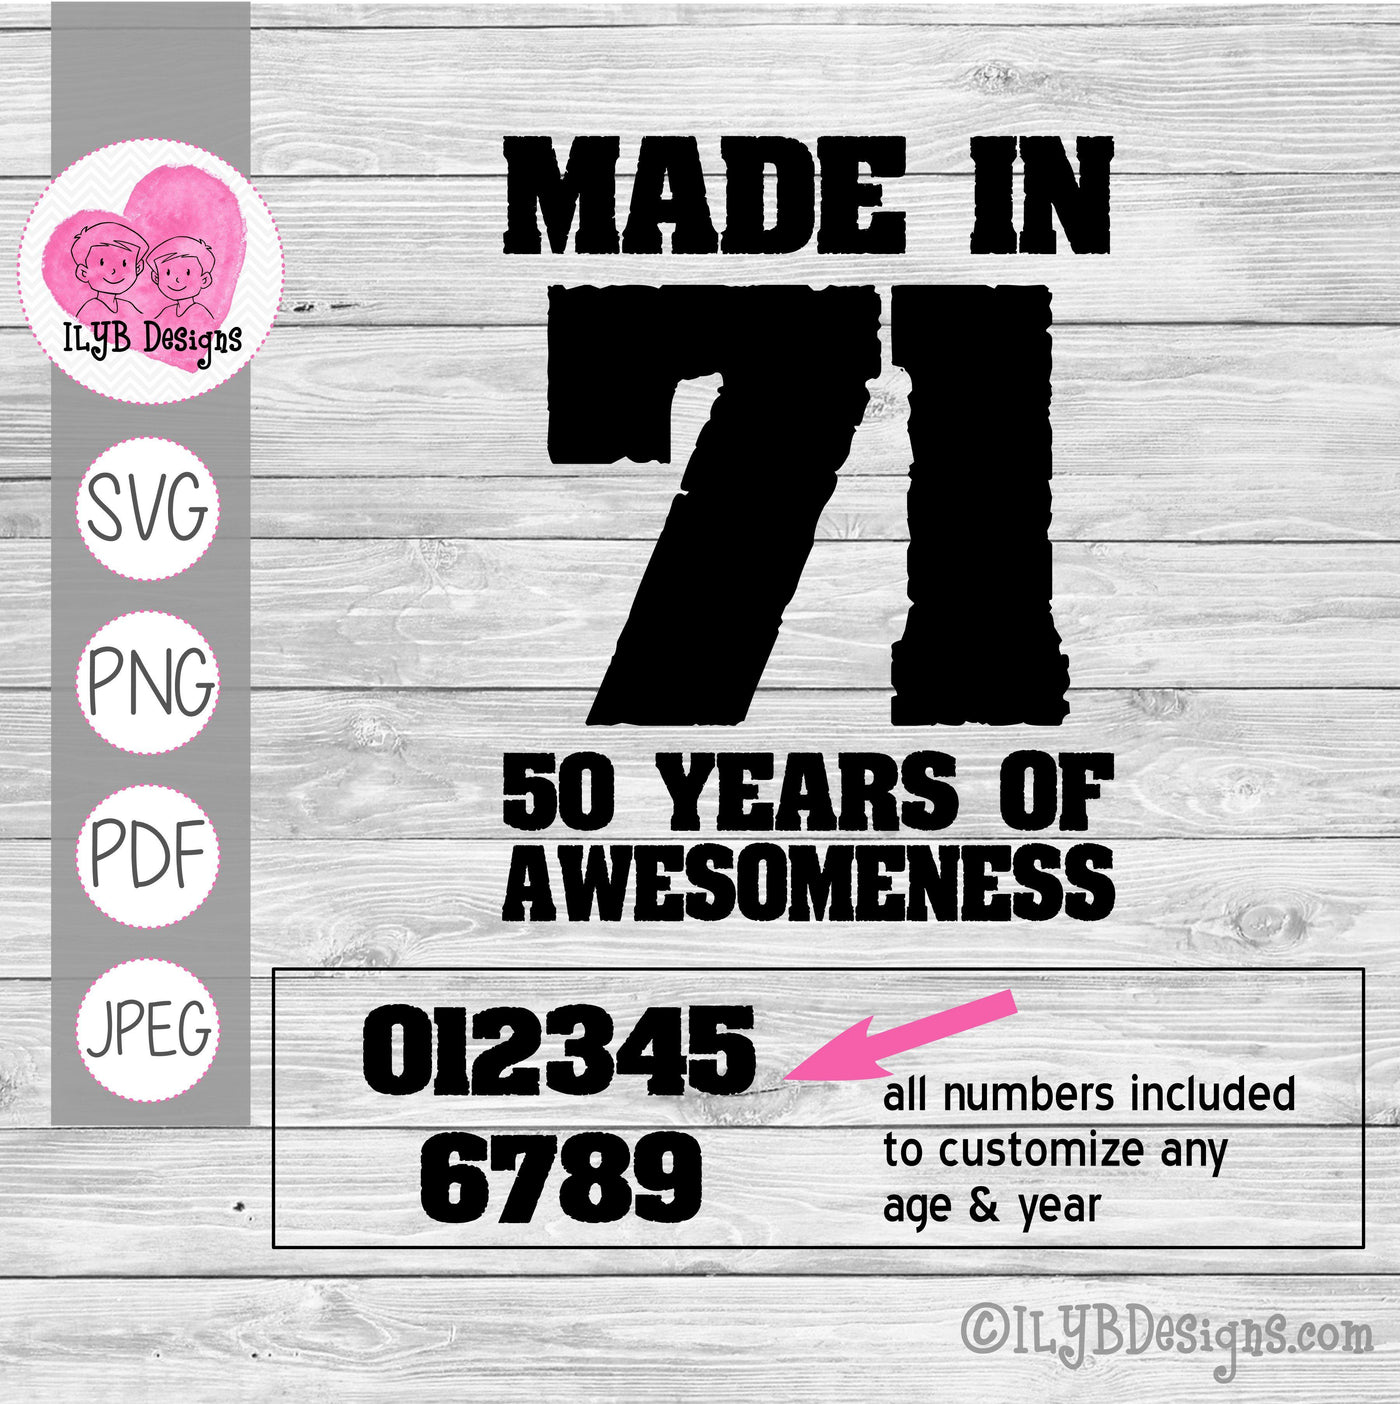 Made In 70s 50 Years of Awesomeness SVG, 50th Birthday Cut File - ILYB Designs